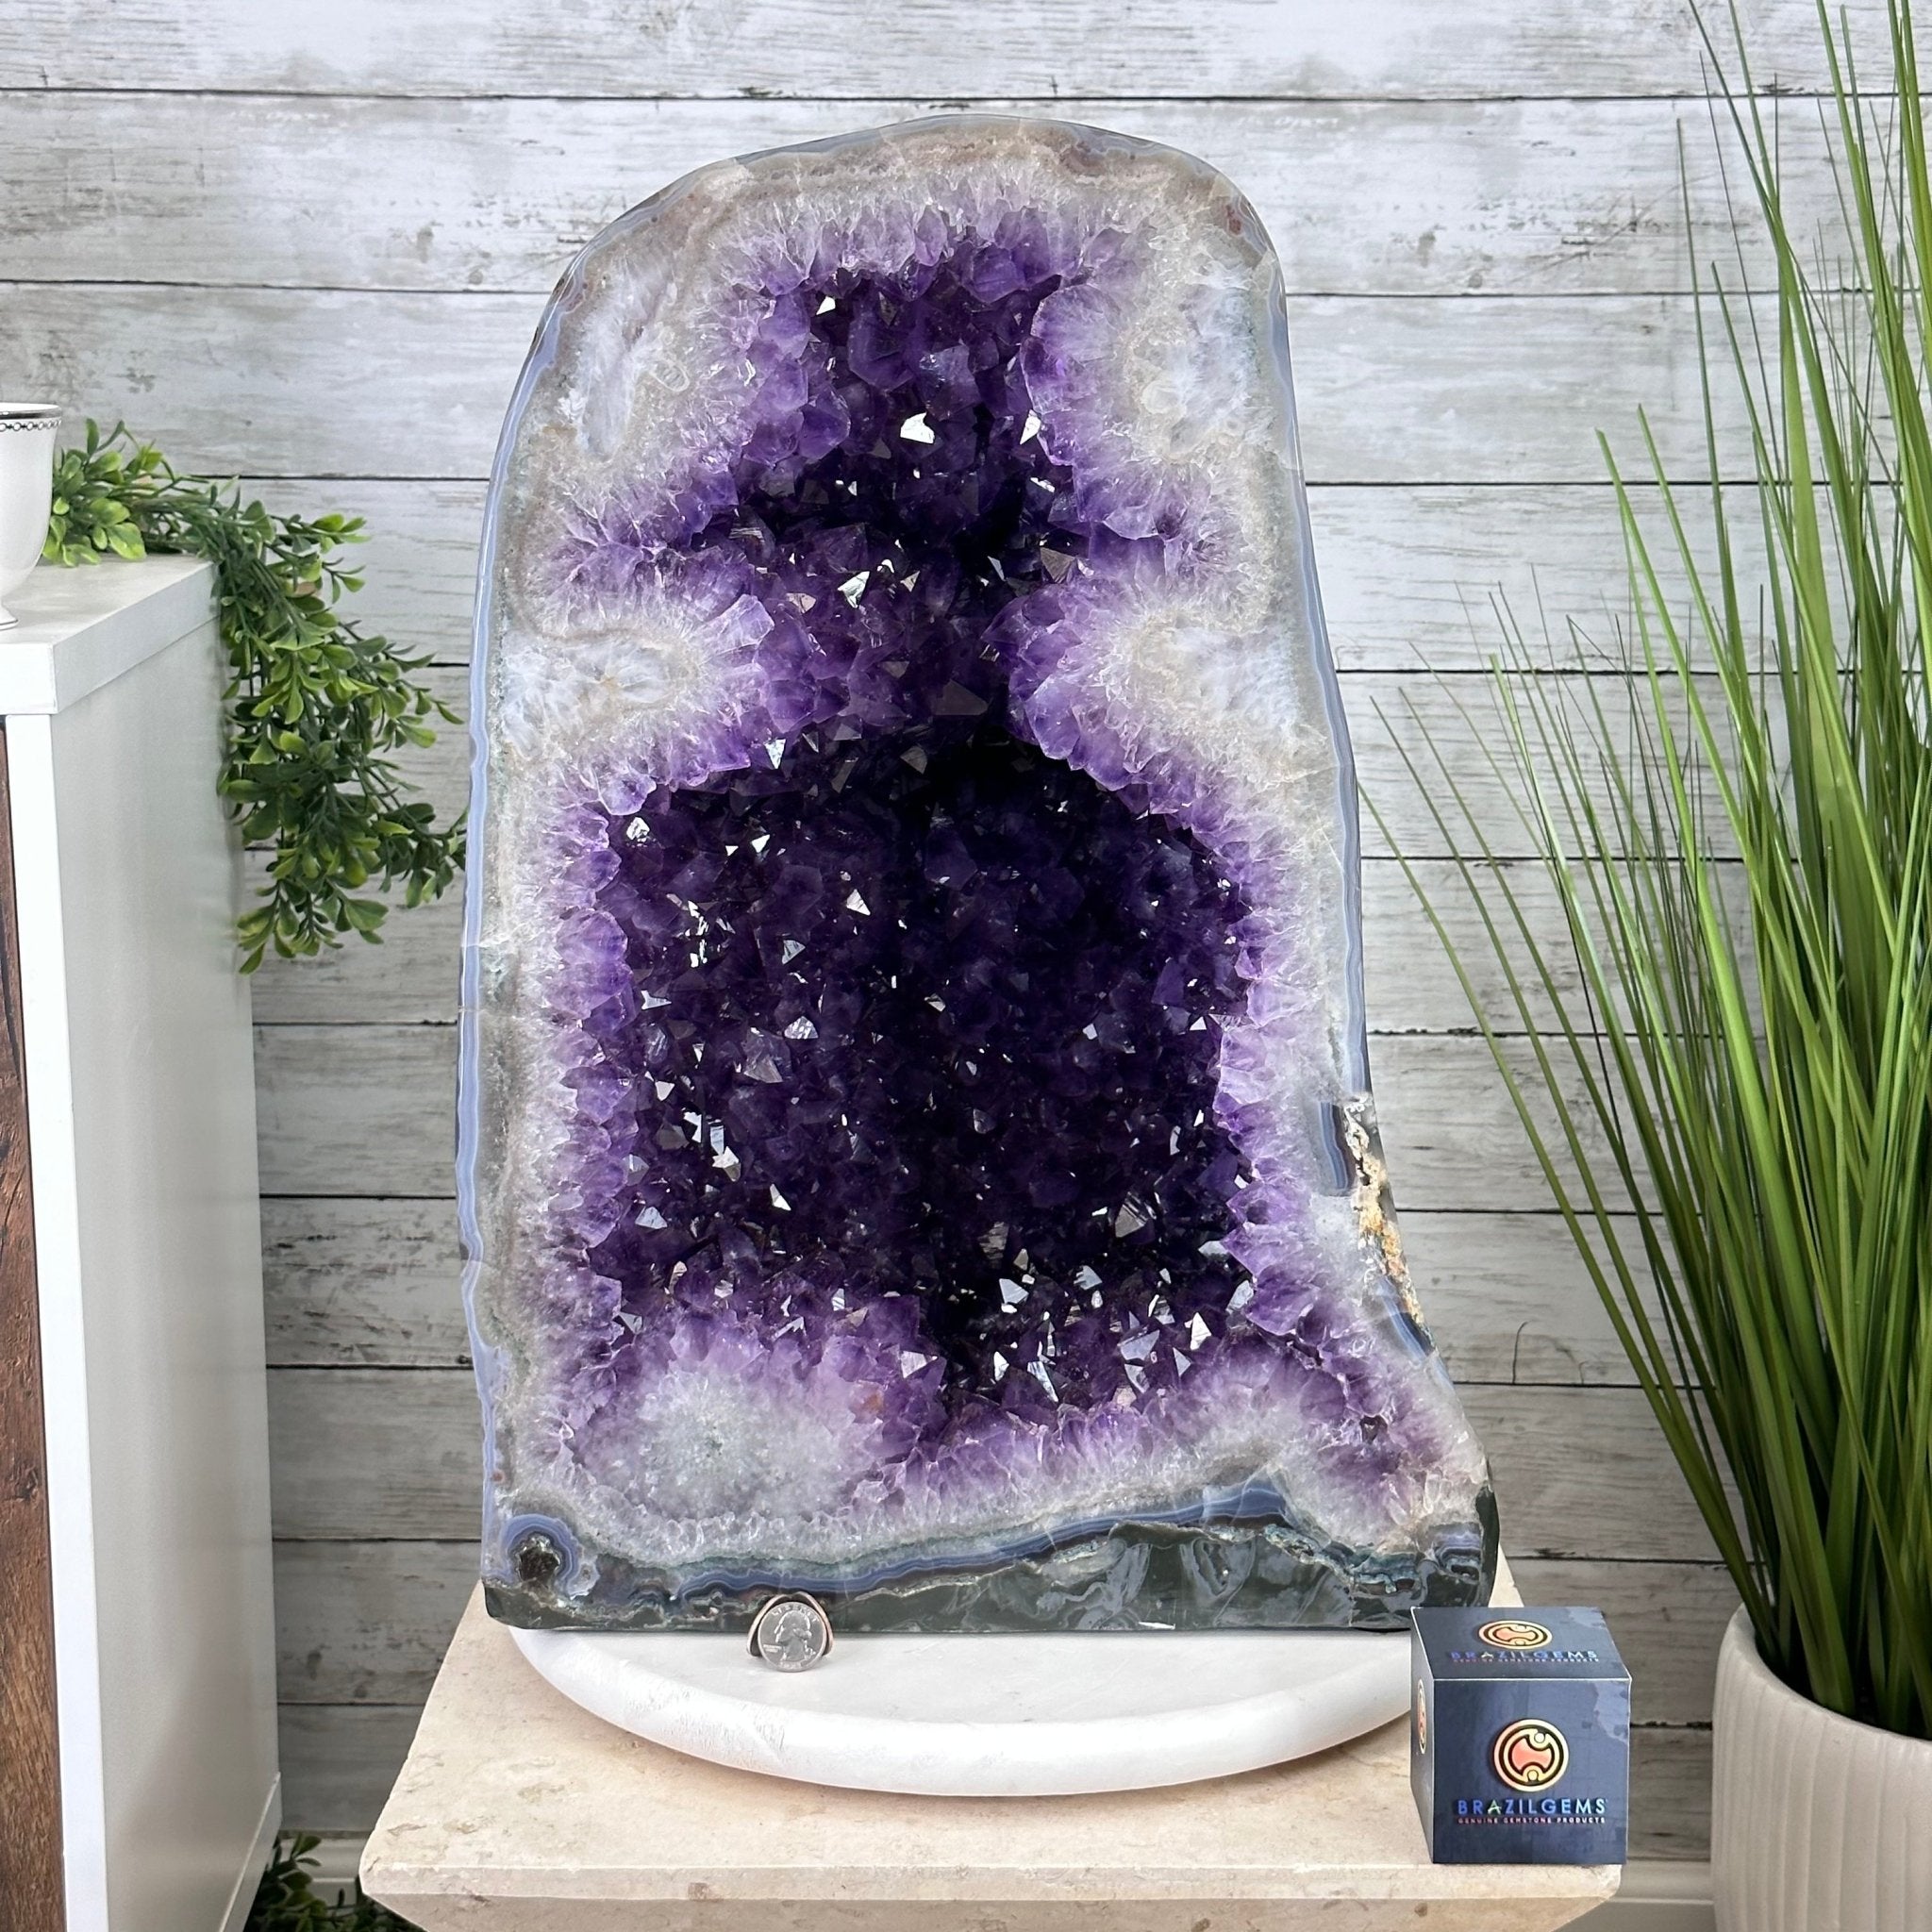 Extra Plus Quality Polished Brazilian Amethyst Cathedral, 103.1 lbs & 19.5" tall Model #5602-0060 by Brazil Gems - Brazil GemsBrazil GemsExtra Plus Quality Polished Brazilian Amethyst Cathedral, 103.1 lbs & 19.5" tall Model #5602-0060 by Brazil GemsPolished Cathedrals5602-0060